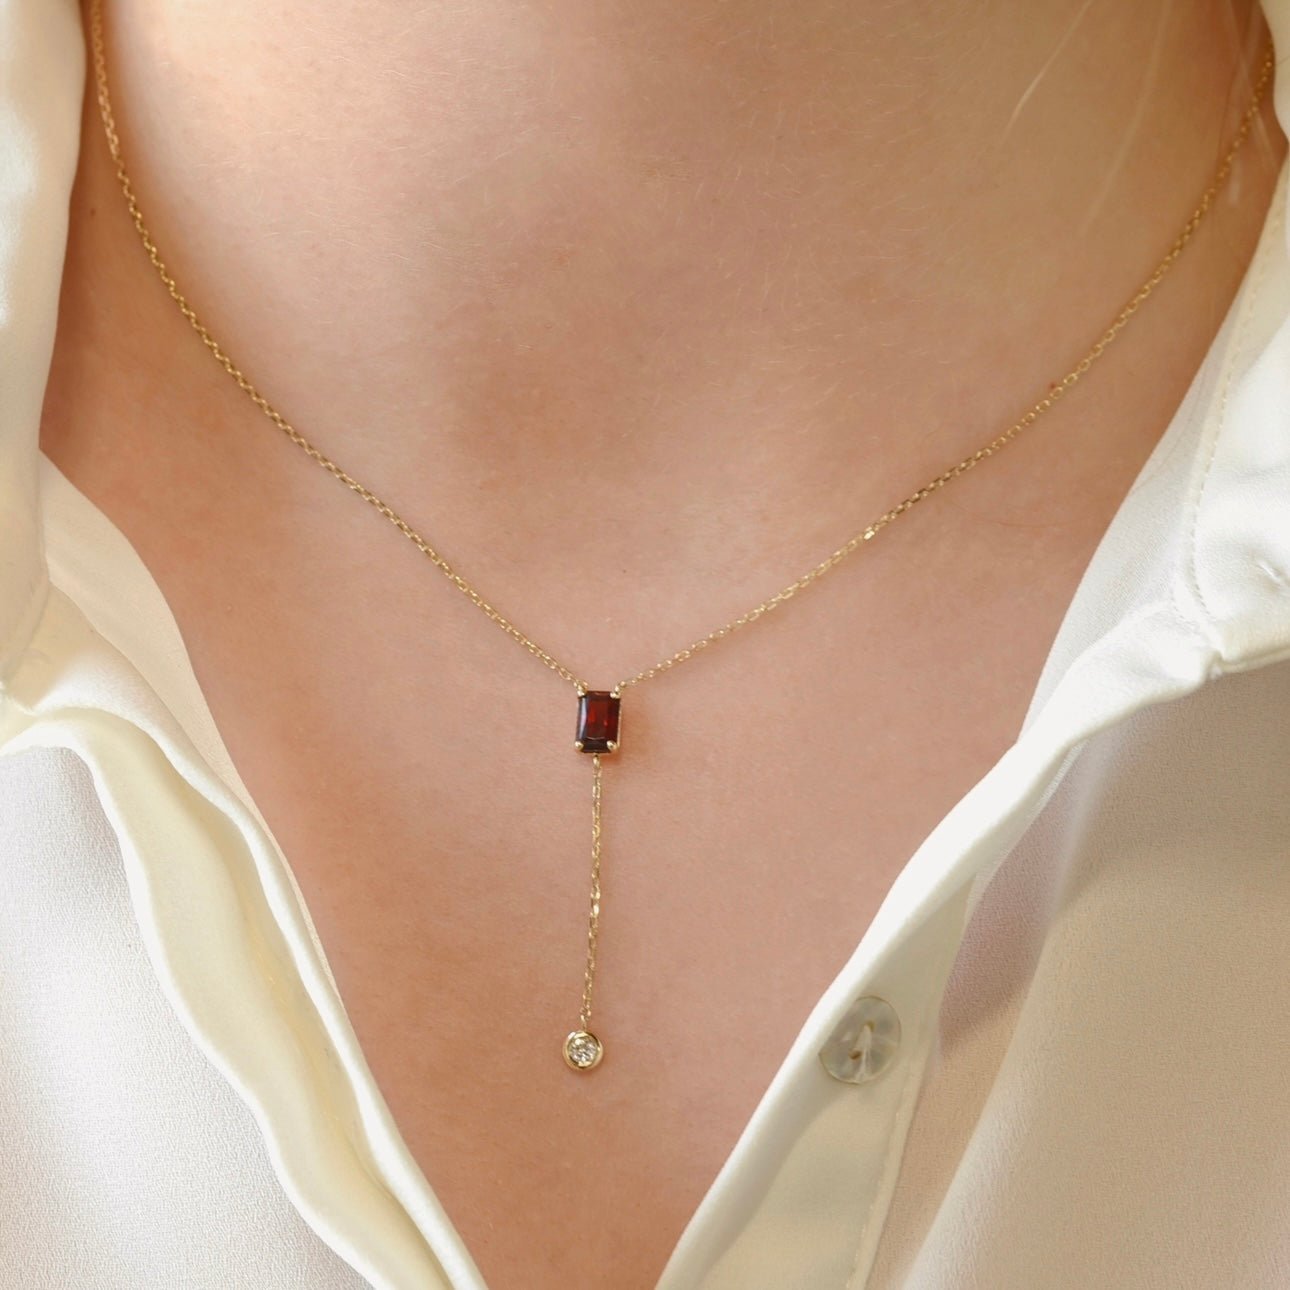 Novena Necklace in Diamond and Garnet - 18k Gold - Ly